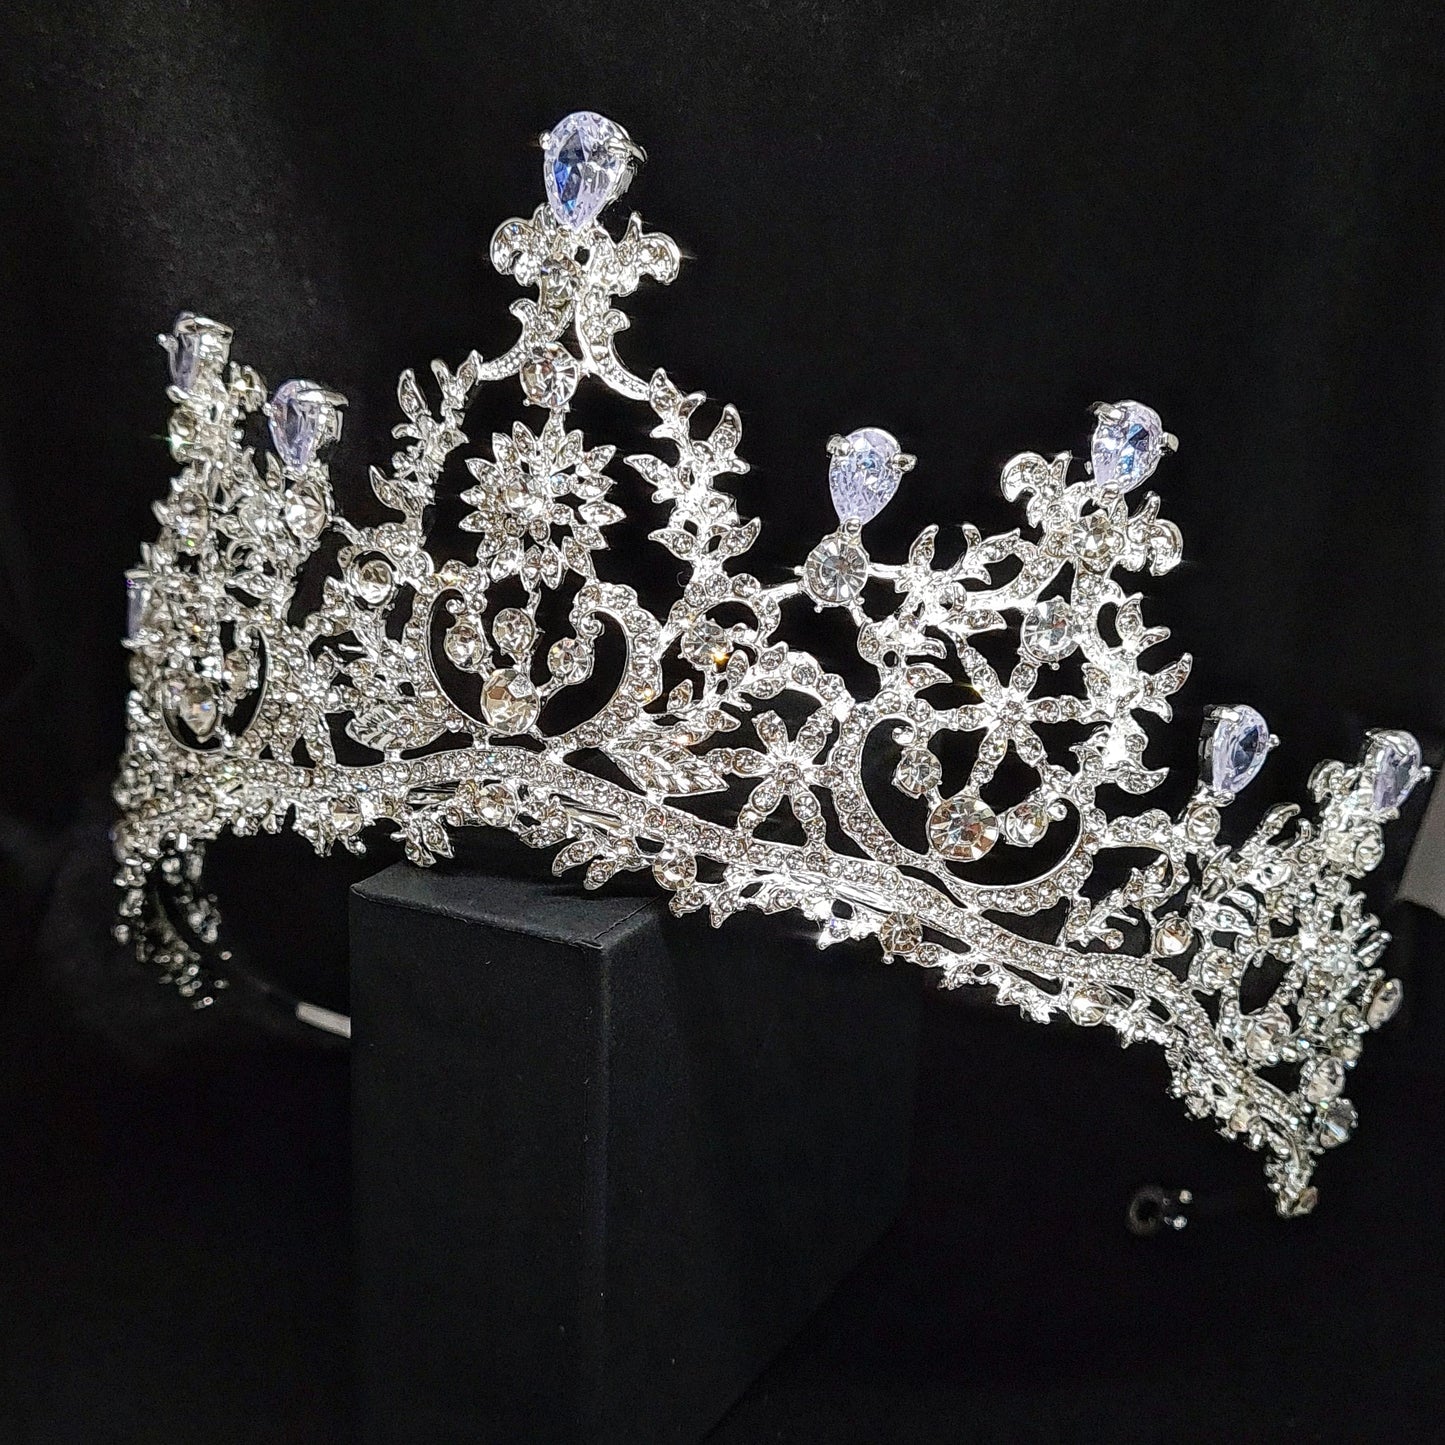  A silver tiara with rhinestones and flowers sitting on a black box. The tiara is made up of multiple curved bands, each of which is decorated with rhinestones and flowers. The tiara is sitting on top of a black box, which is partially obscuring the bottom of the tiara.